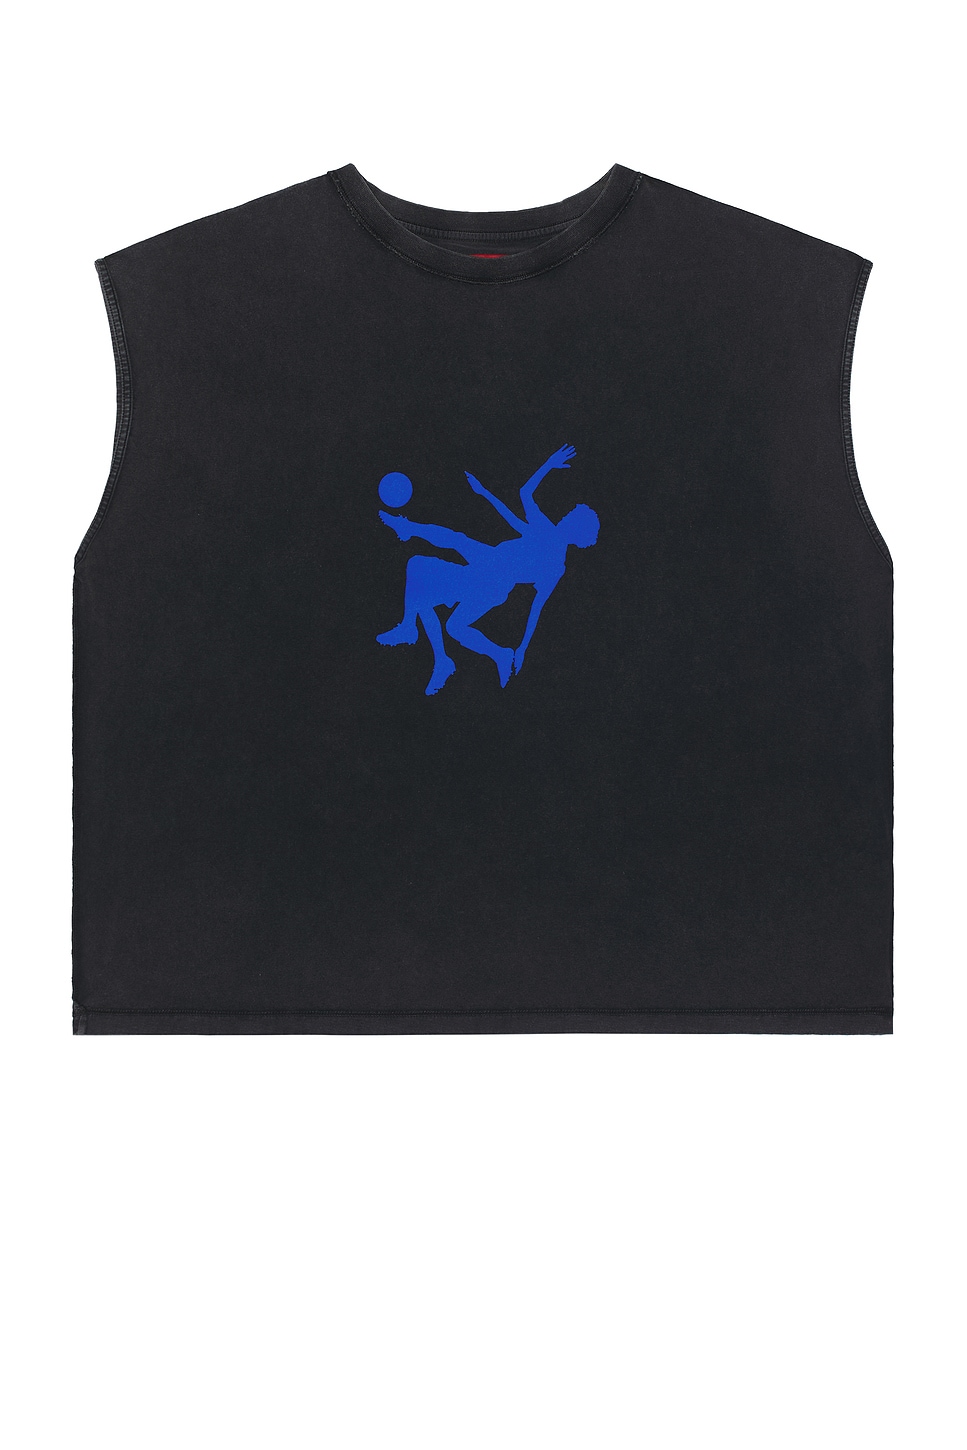 Image 1 of Liberal Youth Ministry Sleeveless T-shirt Knit in Black